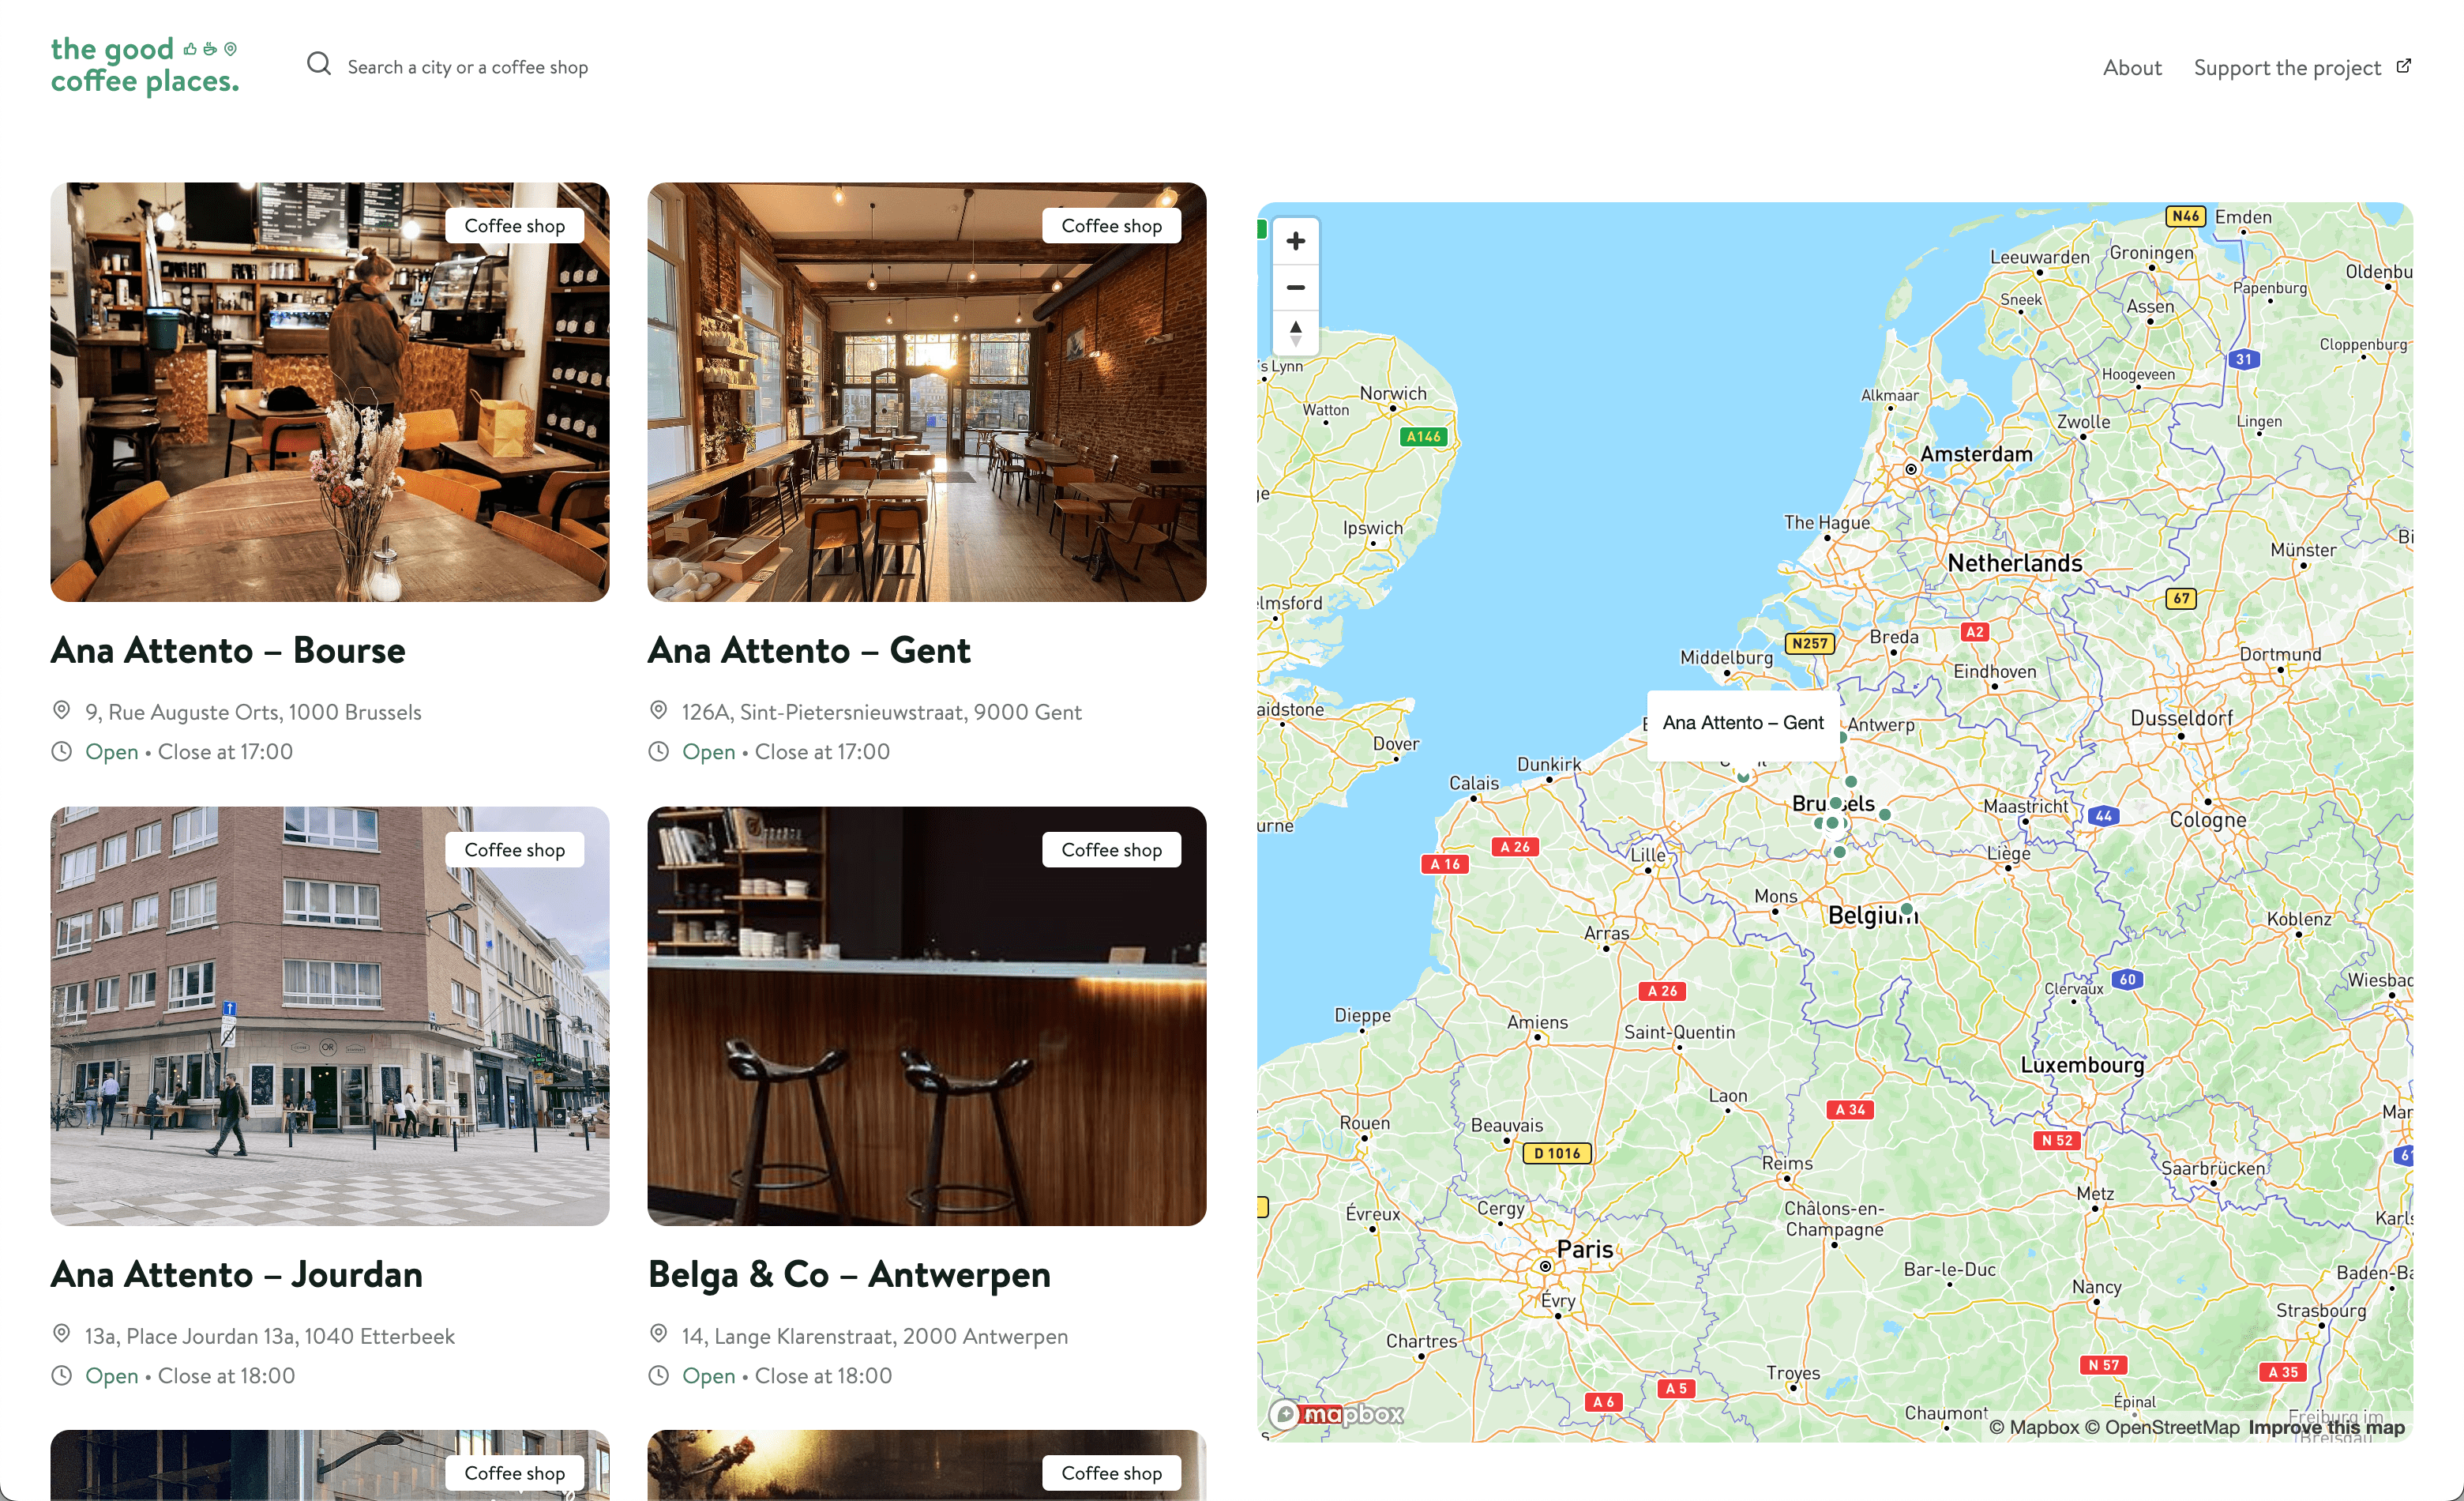 The map and the list of good coffee places on the website The Good Coffee Places